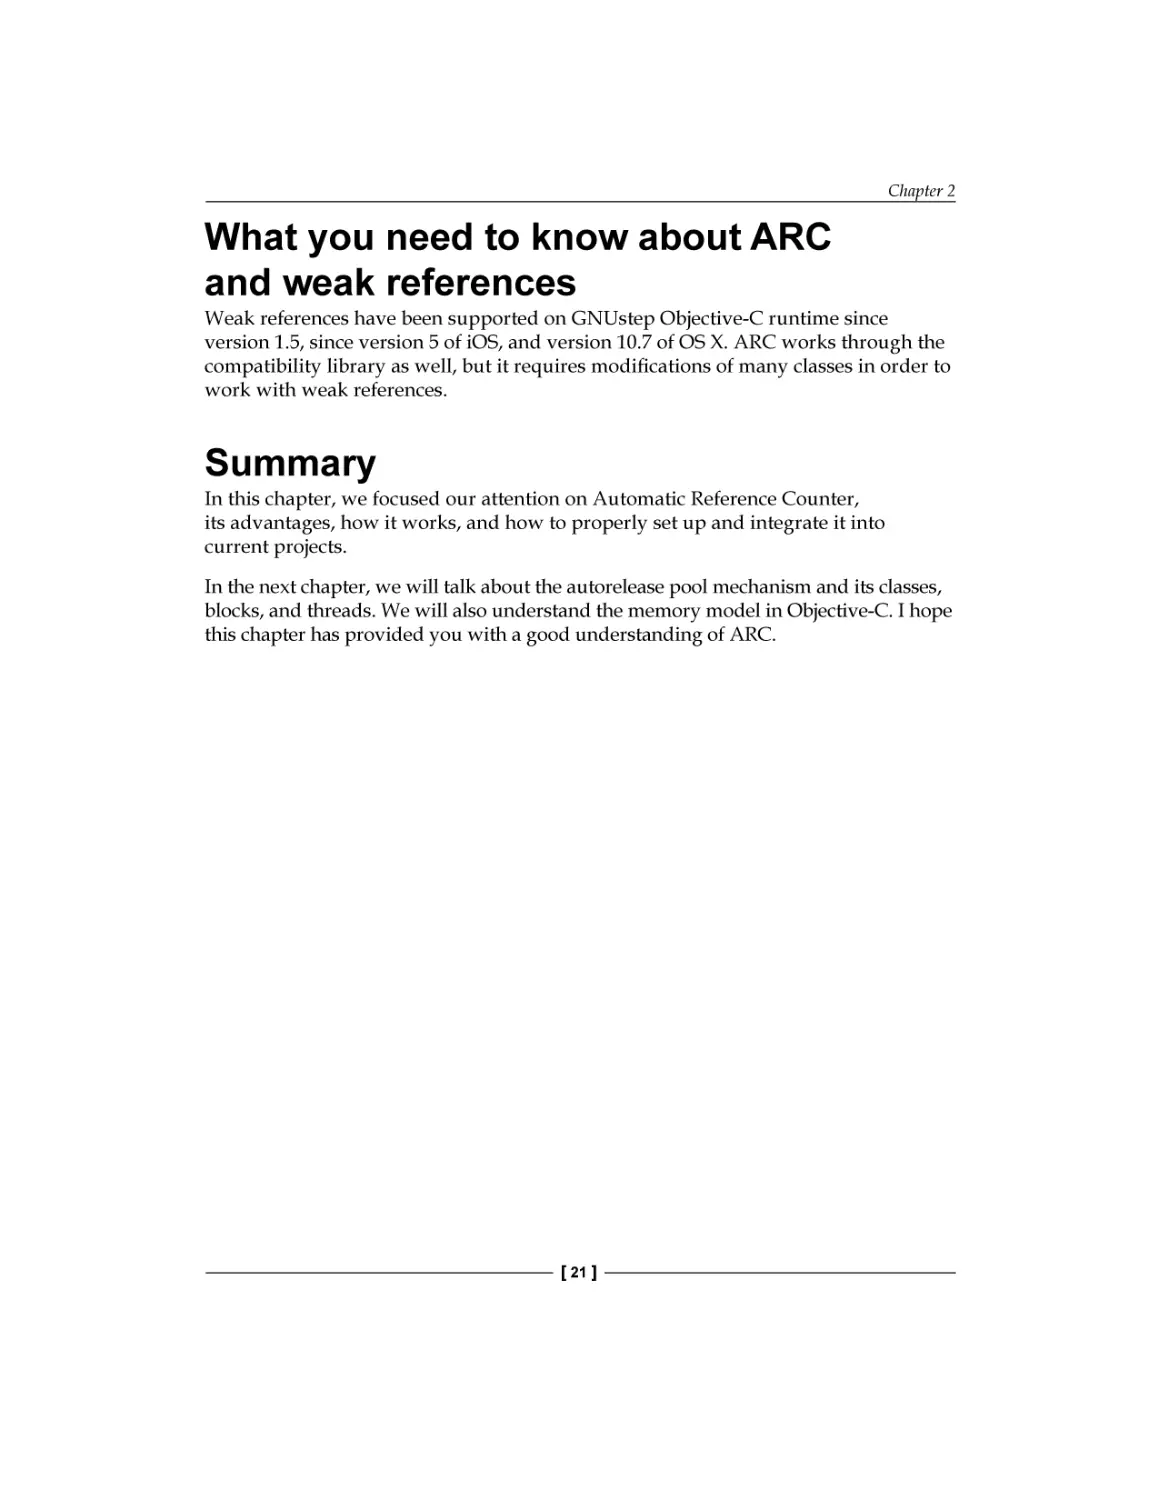 What you need to know about ARC and weak references
Summary